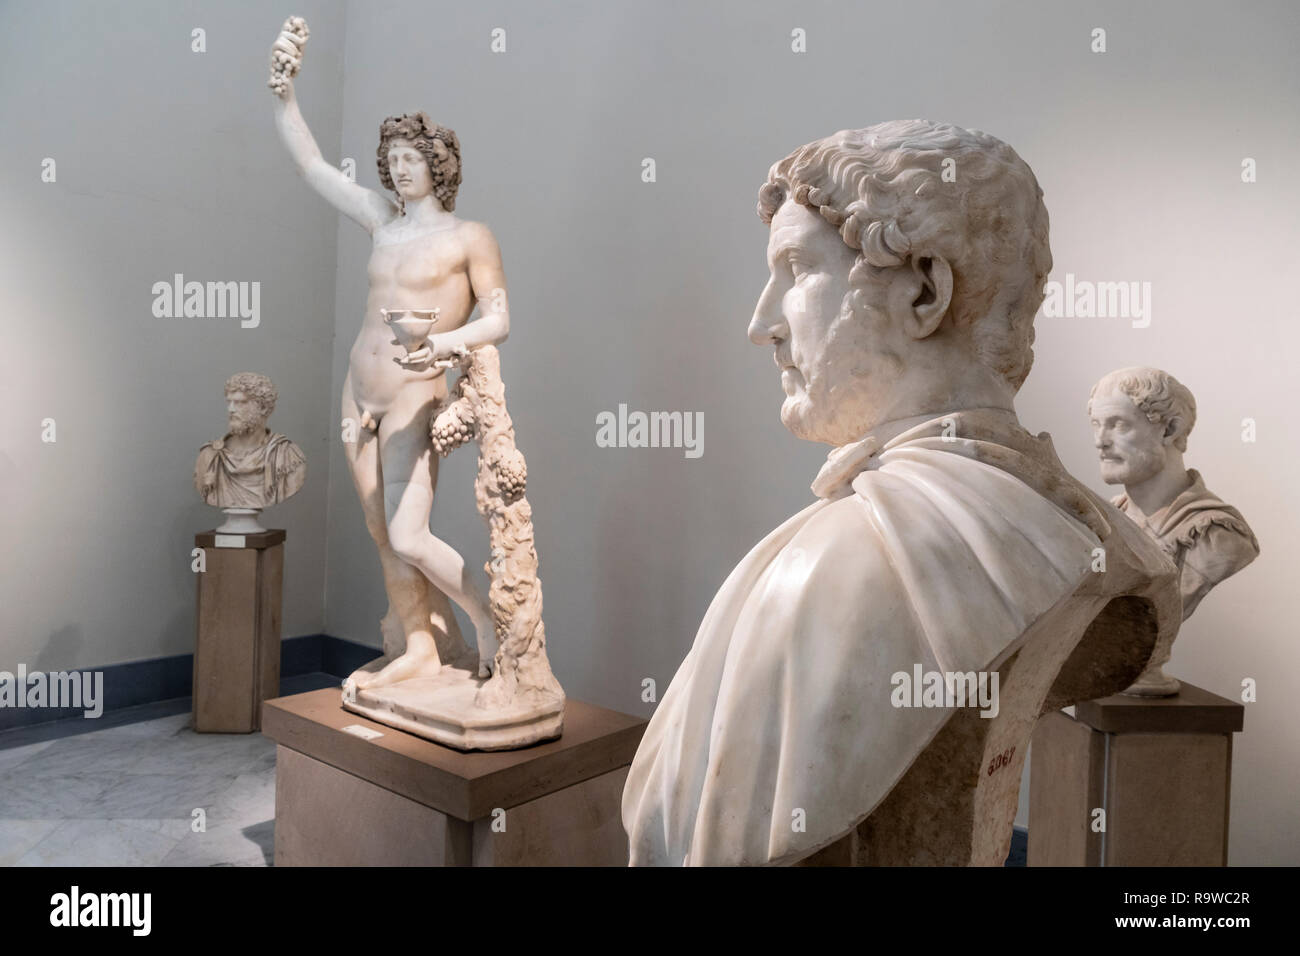 Roman period sculptures In the National Archaeological Museum at Naples, Italy. Stock Photo